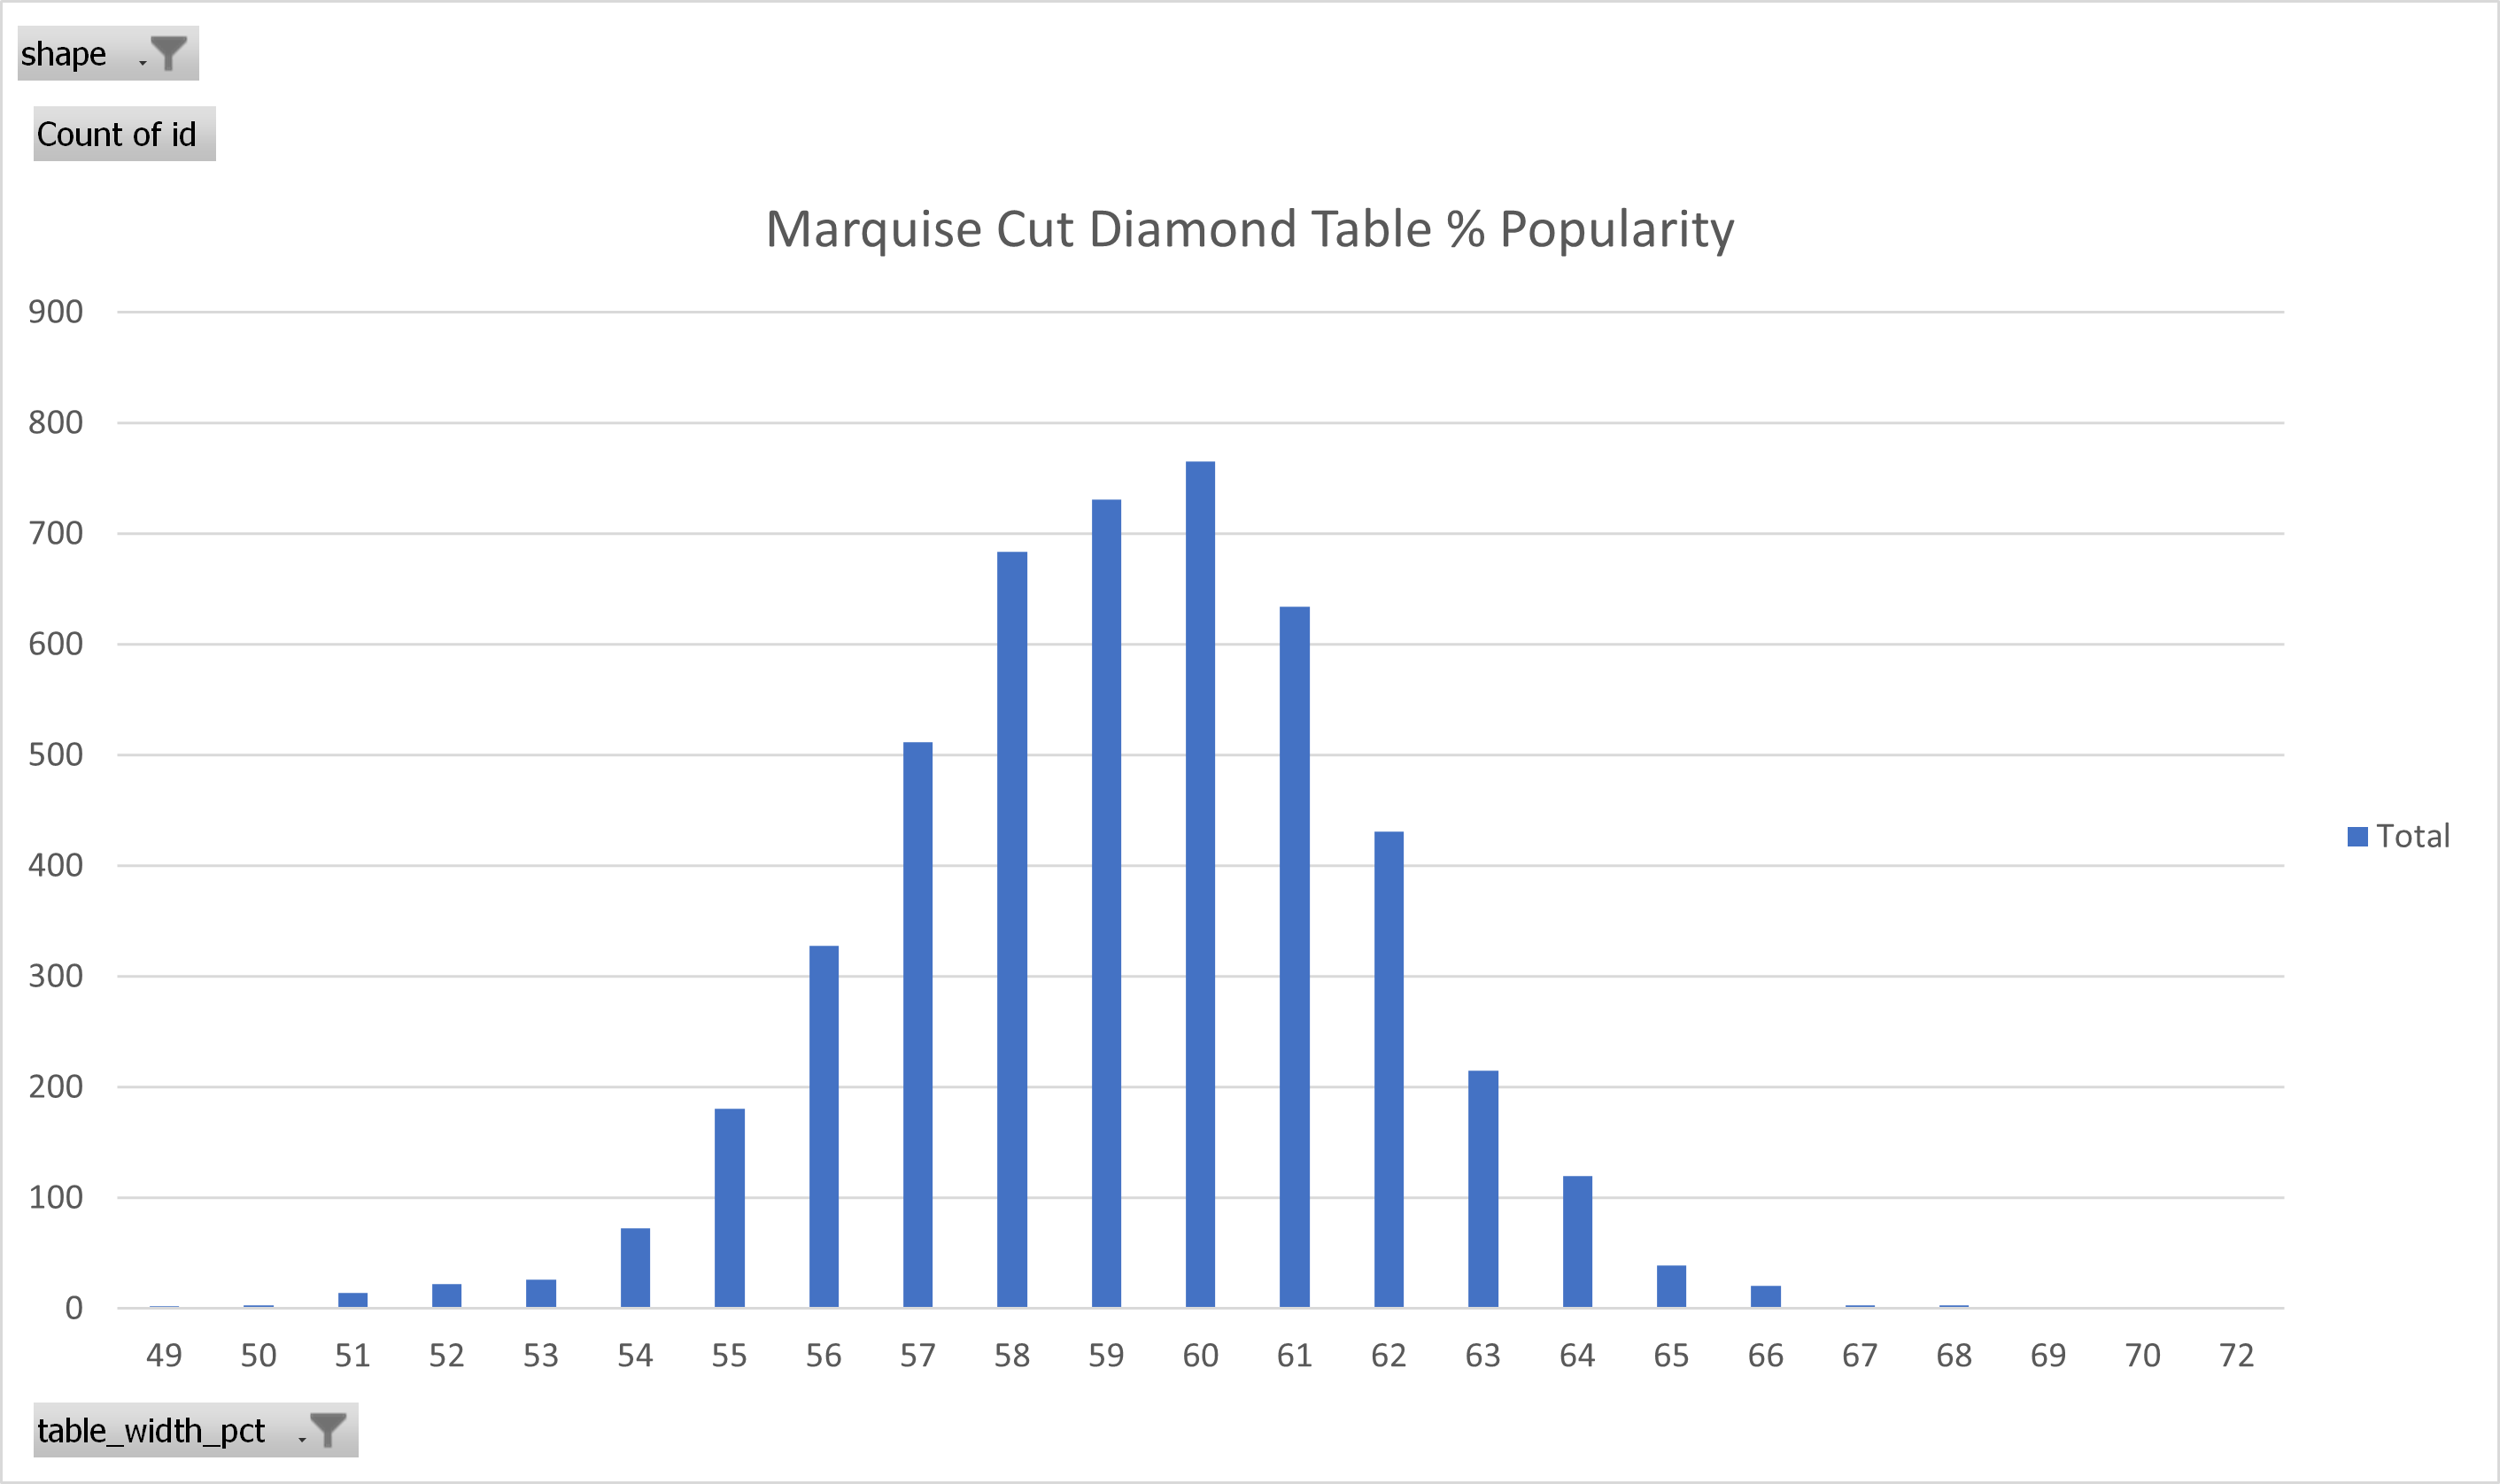 ideal table percentage for marquise cut diamonds